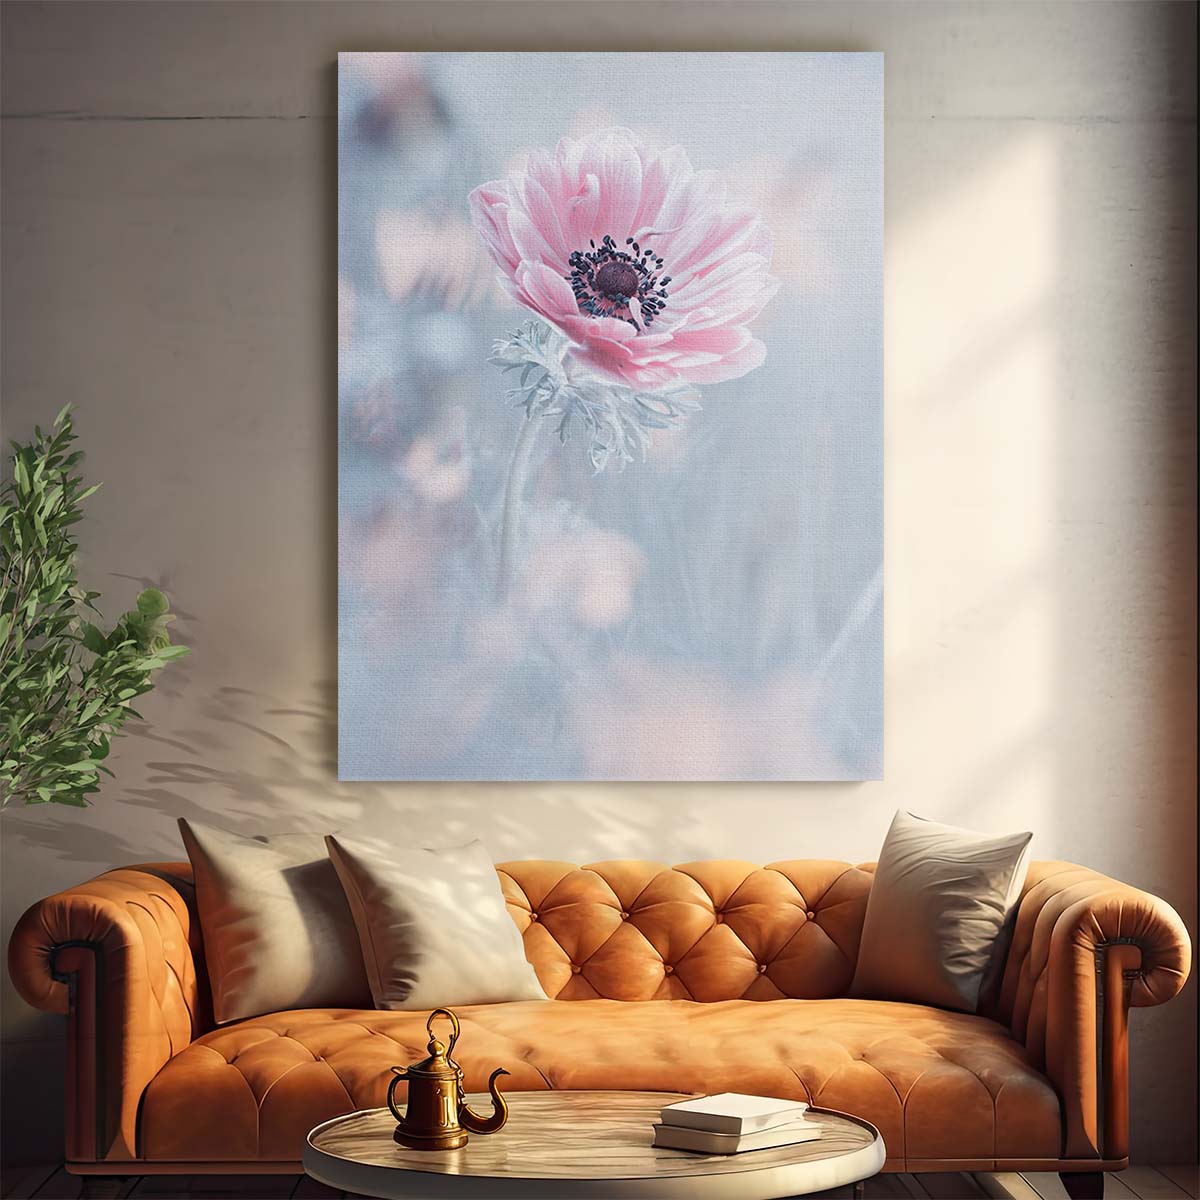 La Reine De Neiges Pastel Pink Macro Floral Photography Wall Art by Luxuriance Designs, made in USA